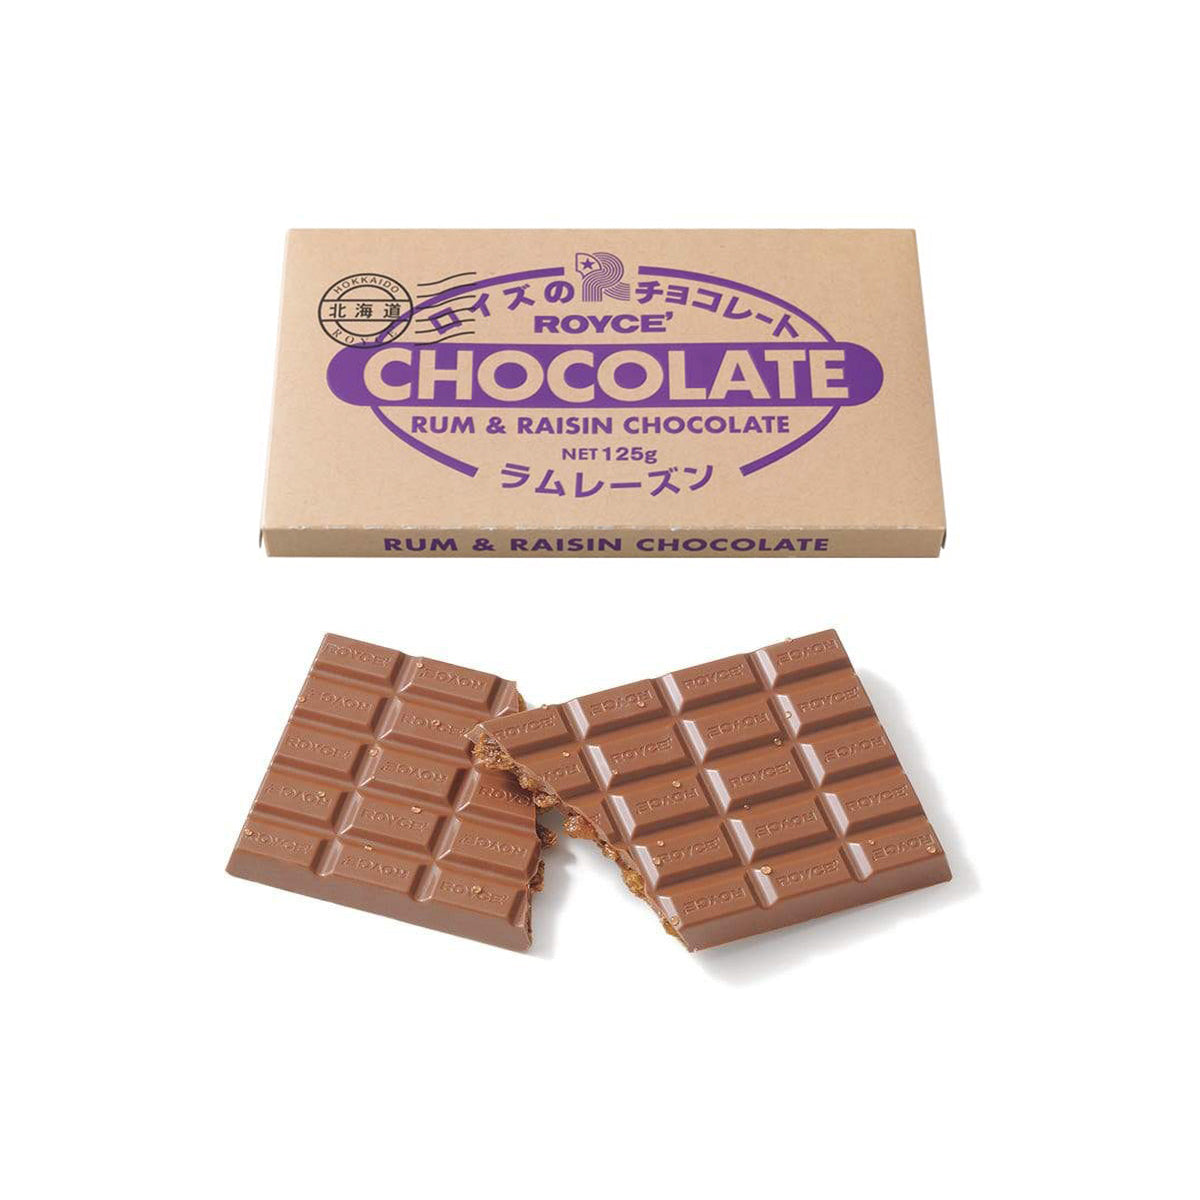 ROYCE' Chocolate - Chocolate Bar "Rum Raisin" - Image shows a chocolate carton. Text in black says Hokkaido ROYCE'. Text in purple says ROYCE' Chocolate Rum & Raisin Chocolate Net 125g. Text on bottom part says Rum & Raisin Chocolate. Image below shows brown chocolate bars with raisin and the word "ROYCE'" engraved.